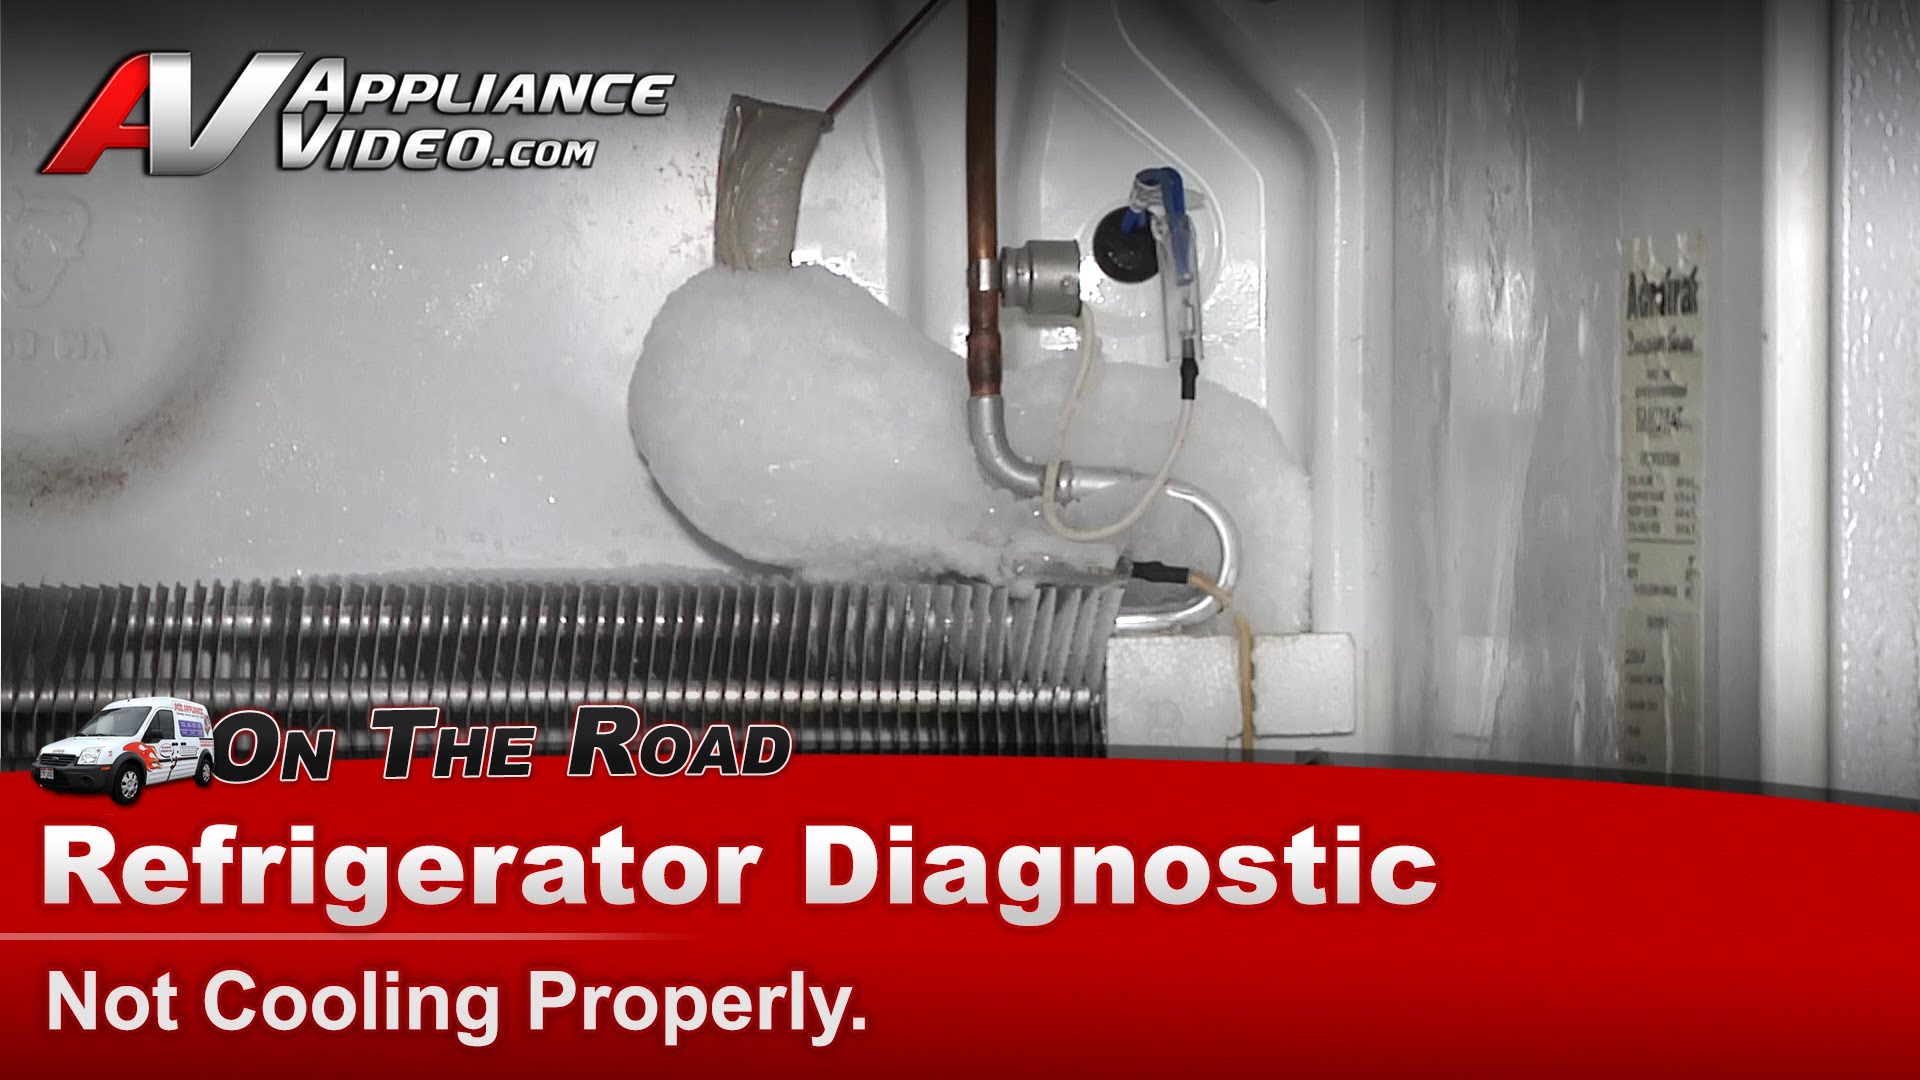 Admiral Hmg211470 Refrigerator Diagnostic Freezer Not Cooling Properly Ice Build Up Behind Fan Appliance Video